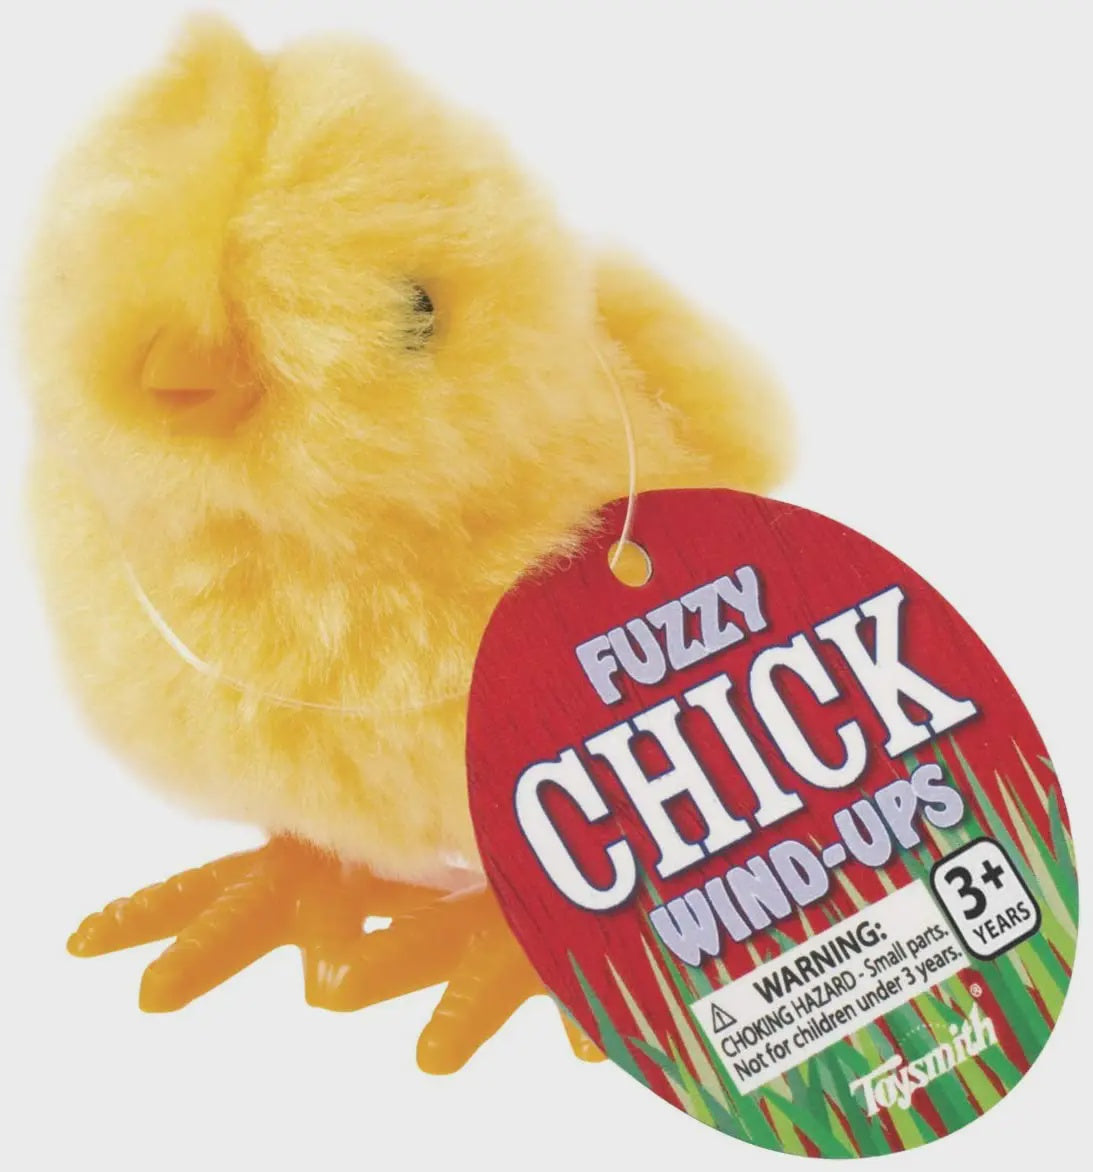 Yellow Fuzzy Chick Wind Up Toy